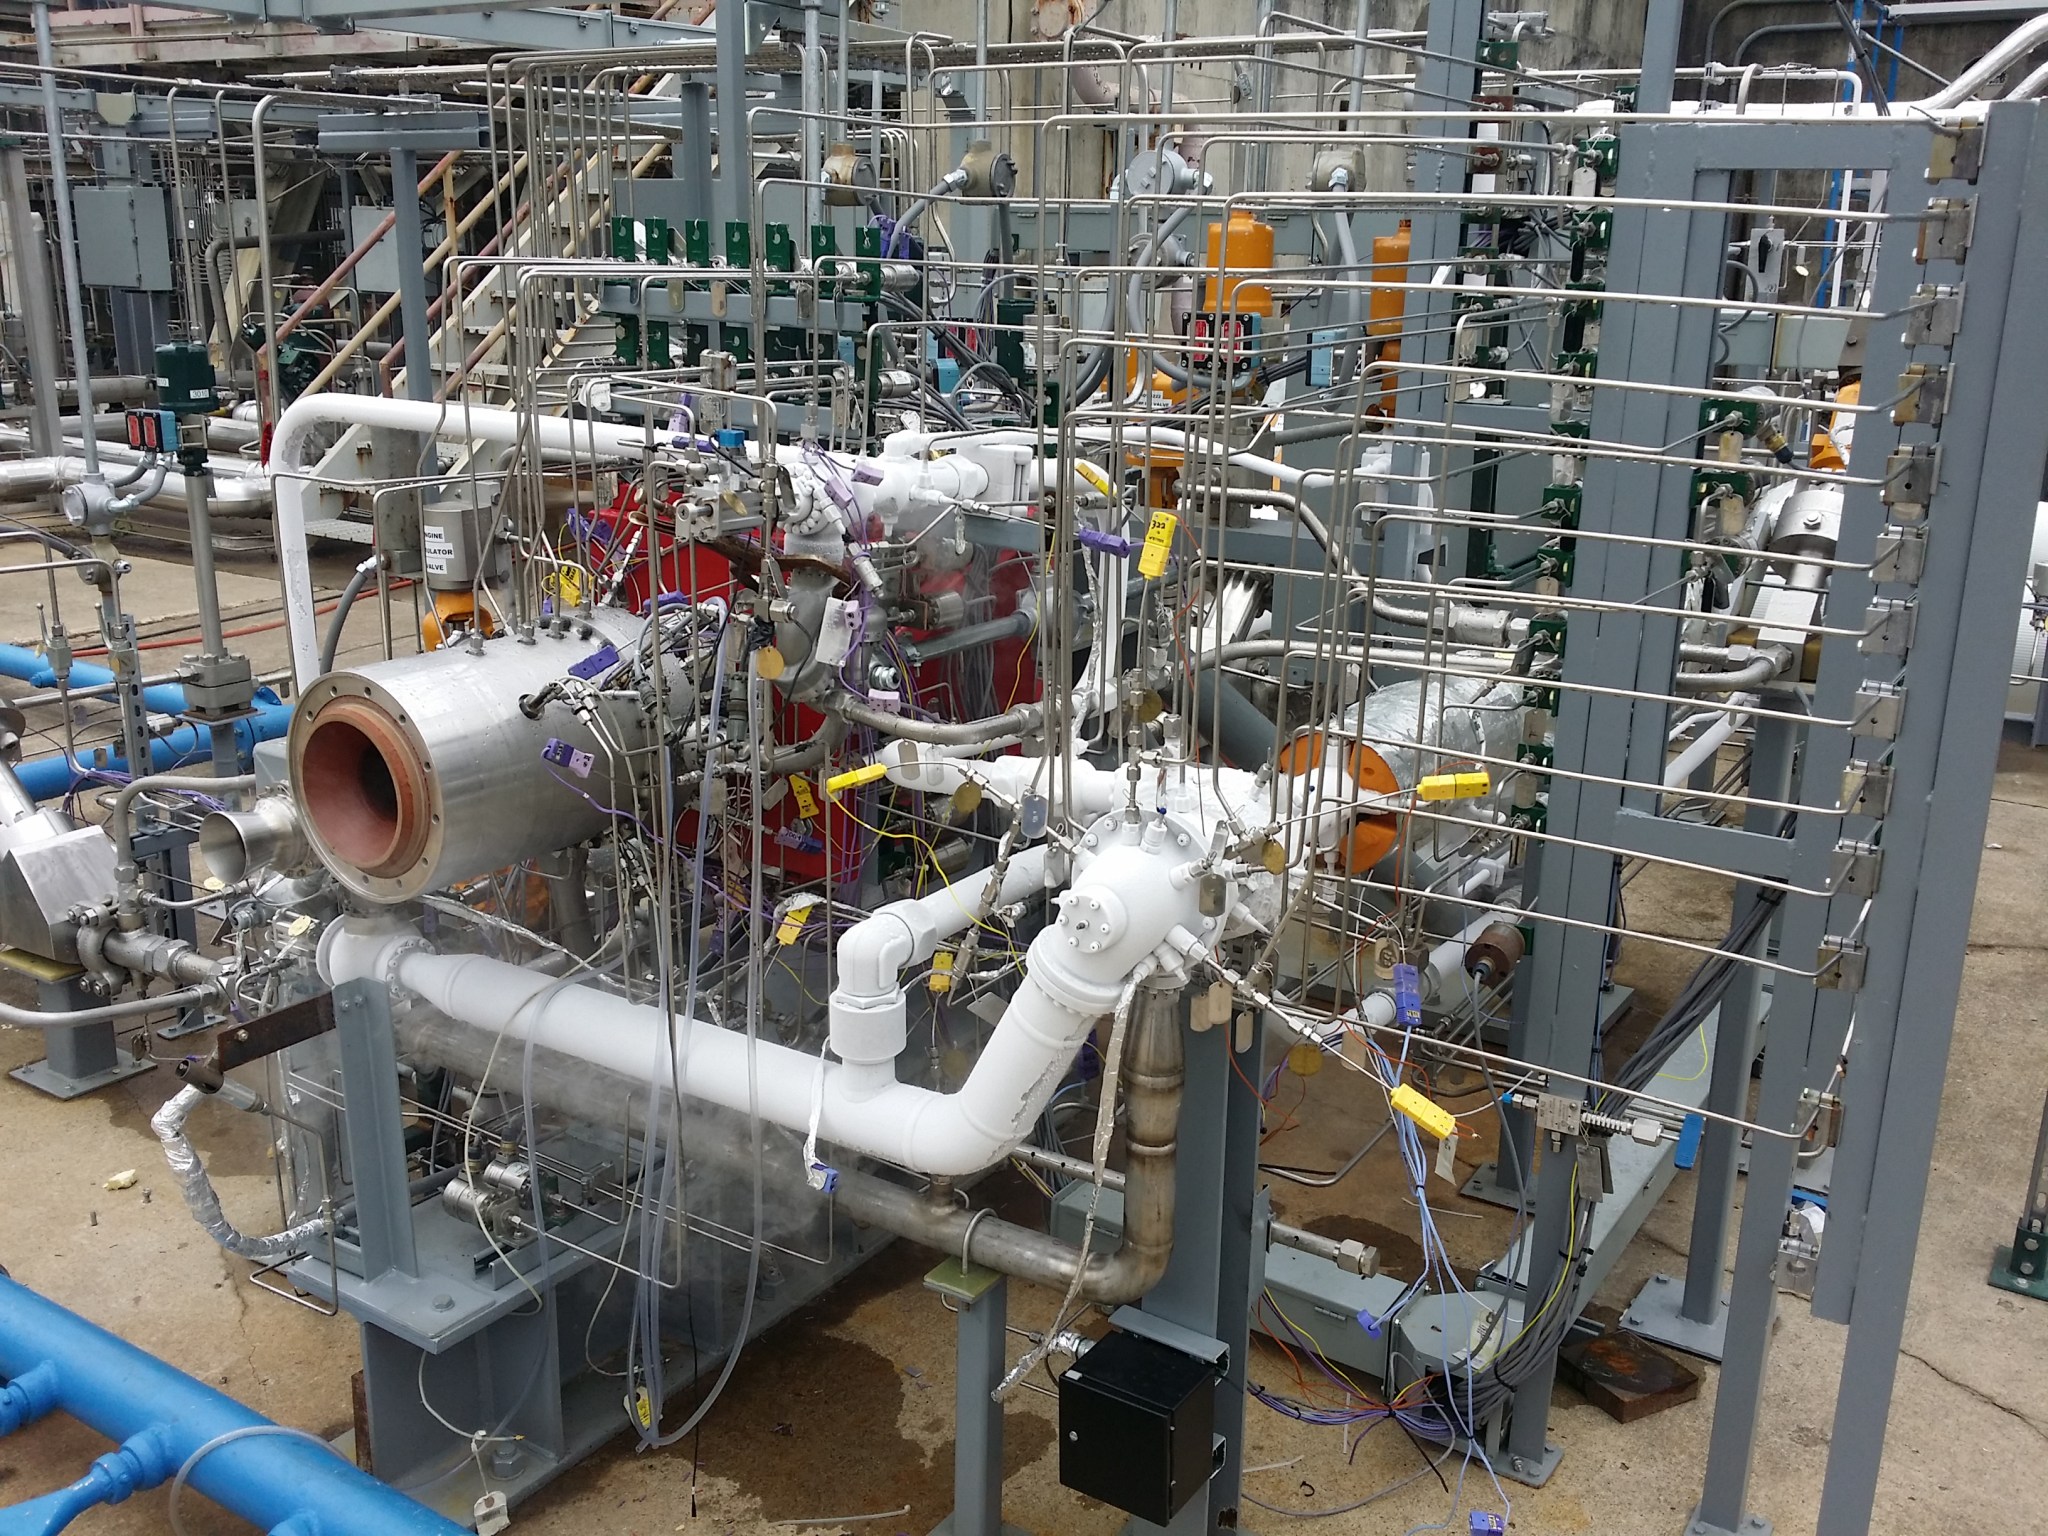 Marshall engineers recently performed preliminary tests on a 3-D printed turbopump to be used with a methane-powered engine.